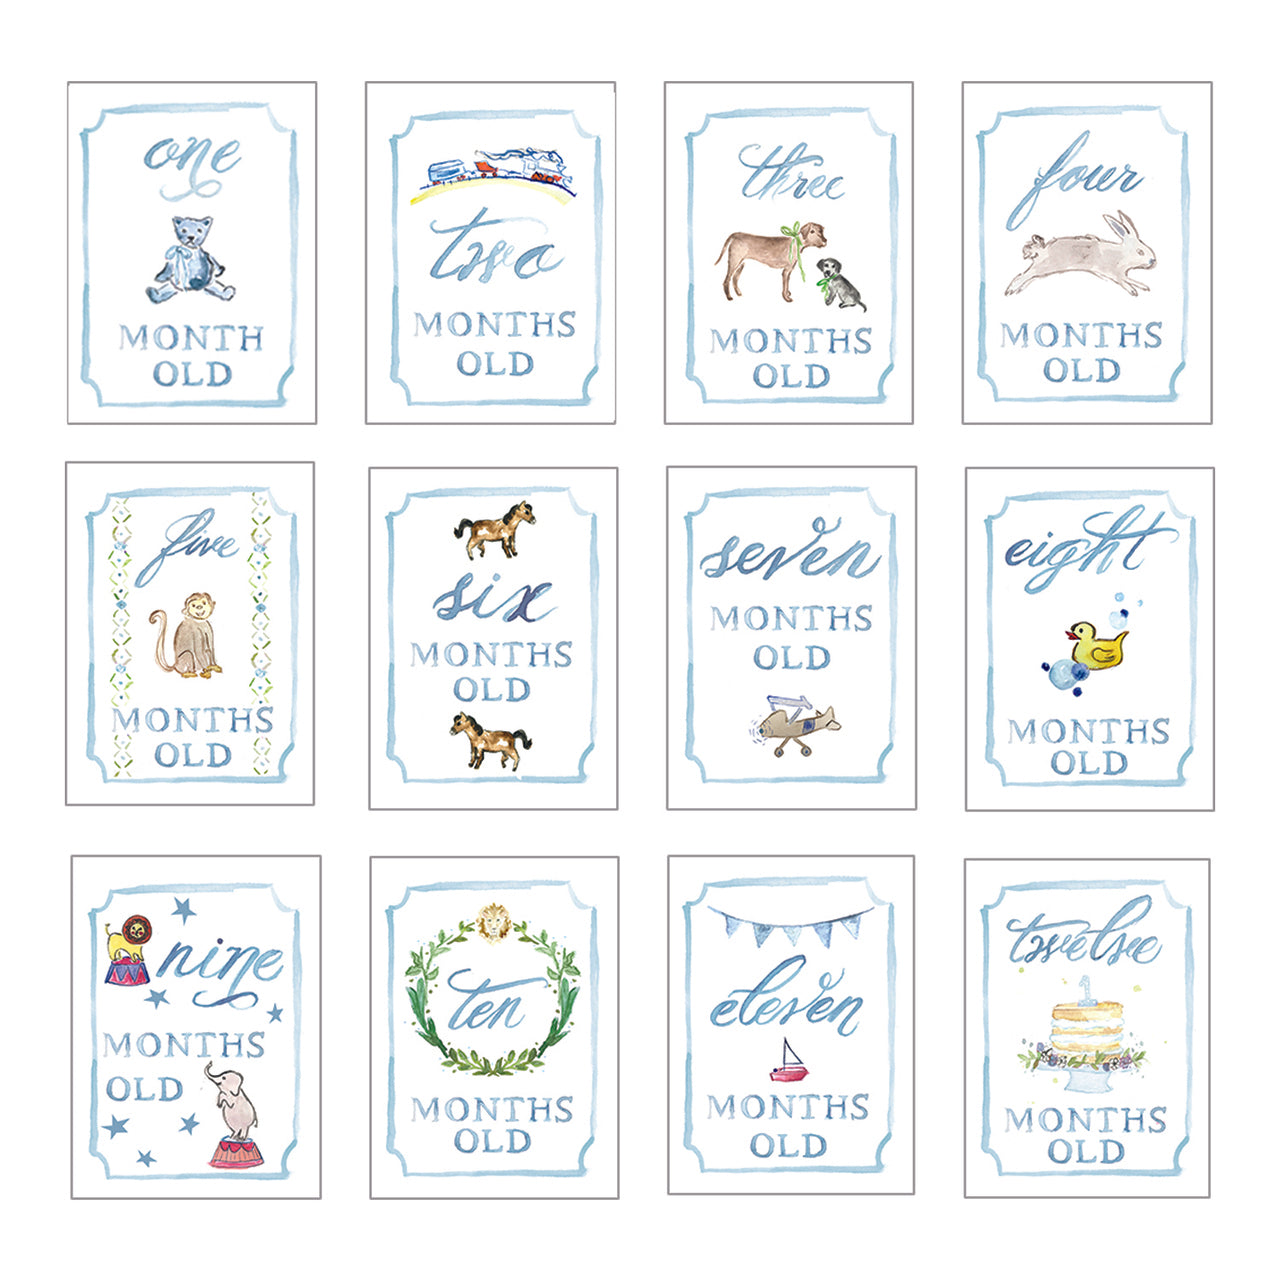 Over the Moon Month by Month Cards